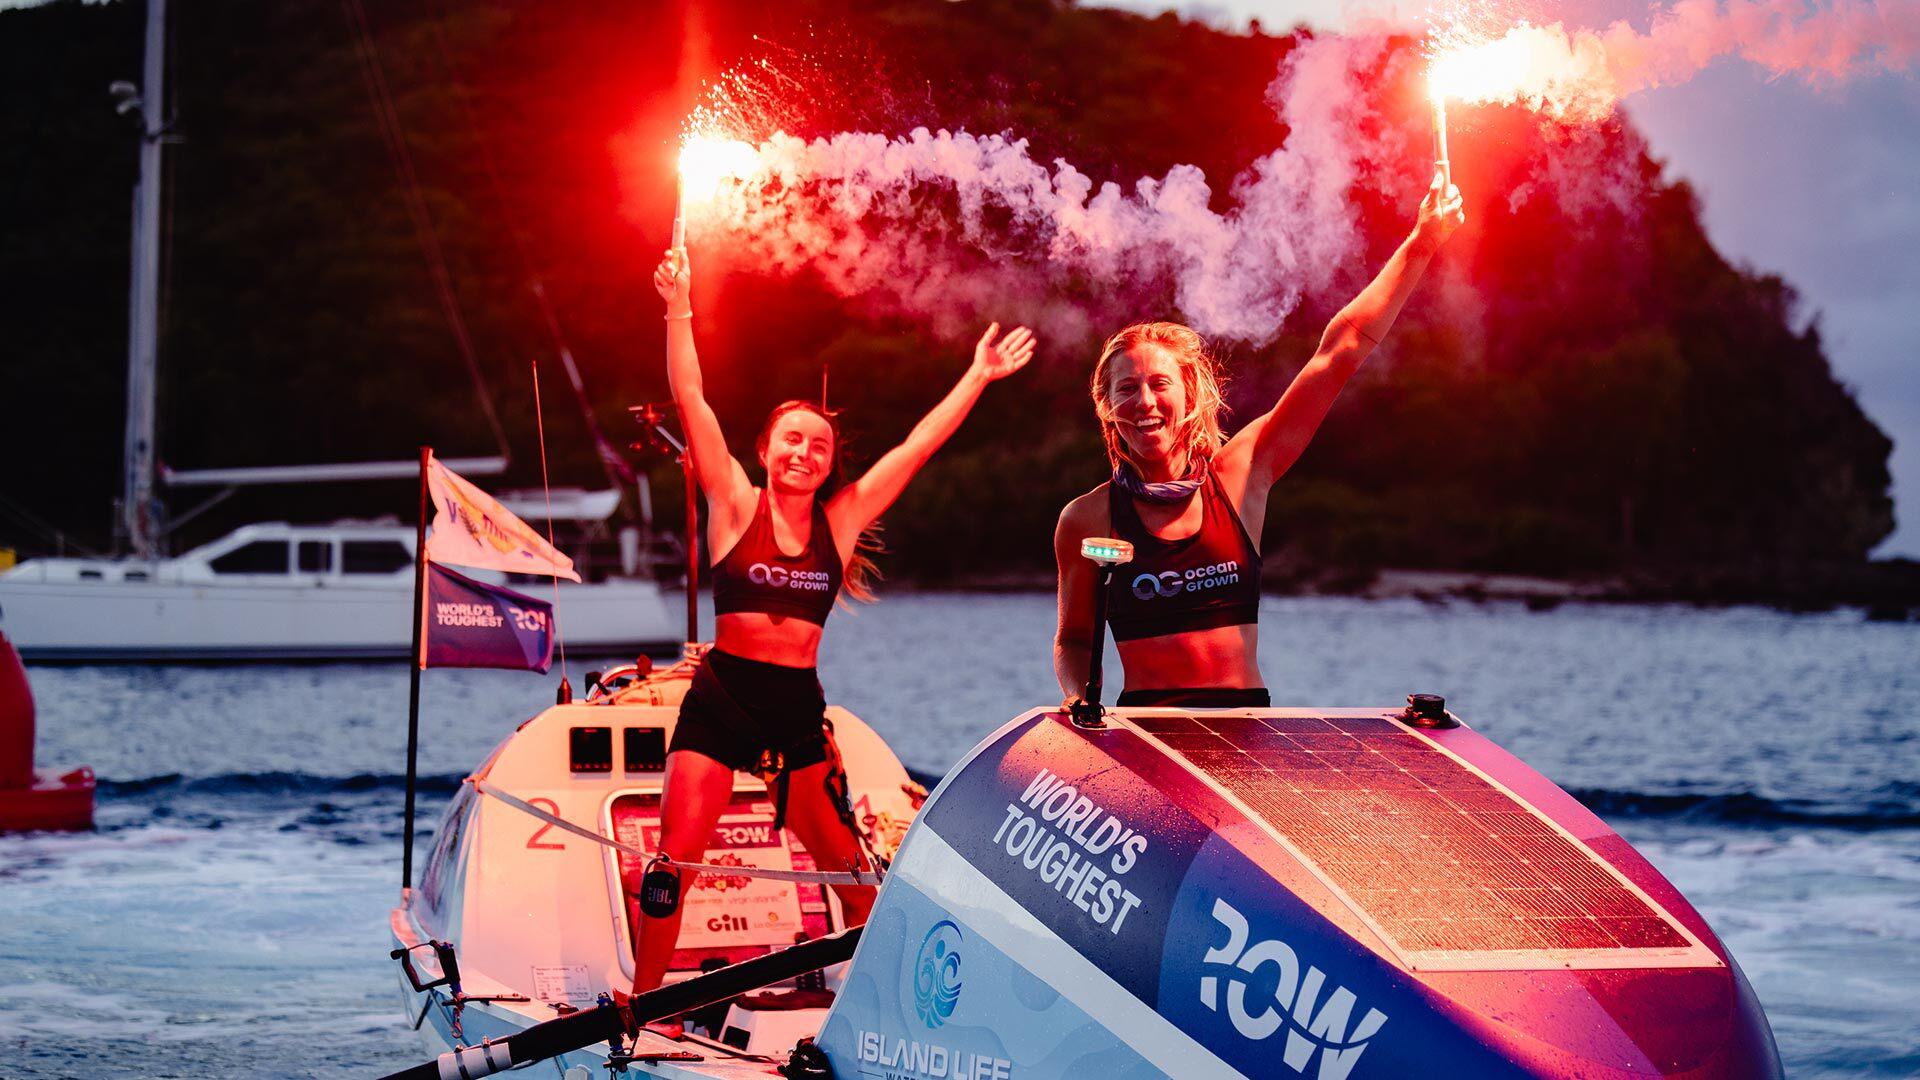 Lisa Roland and Nini Champion hold flares at finish line of World's Toughest Row